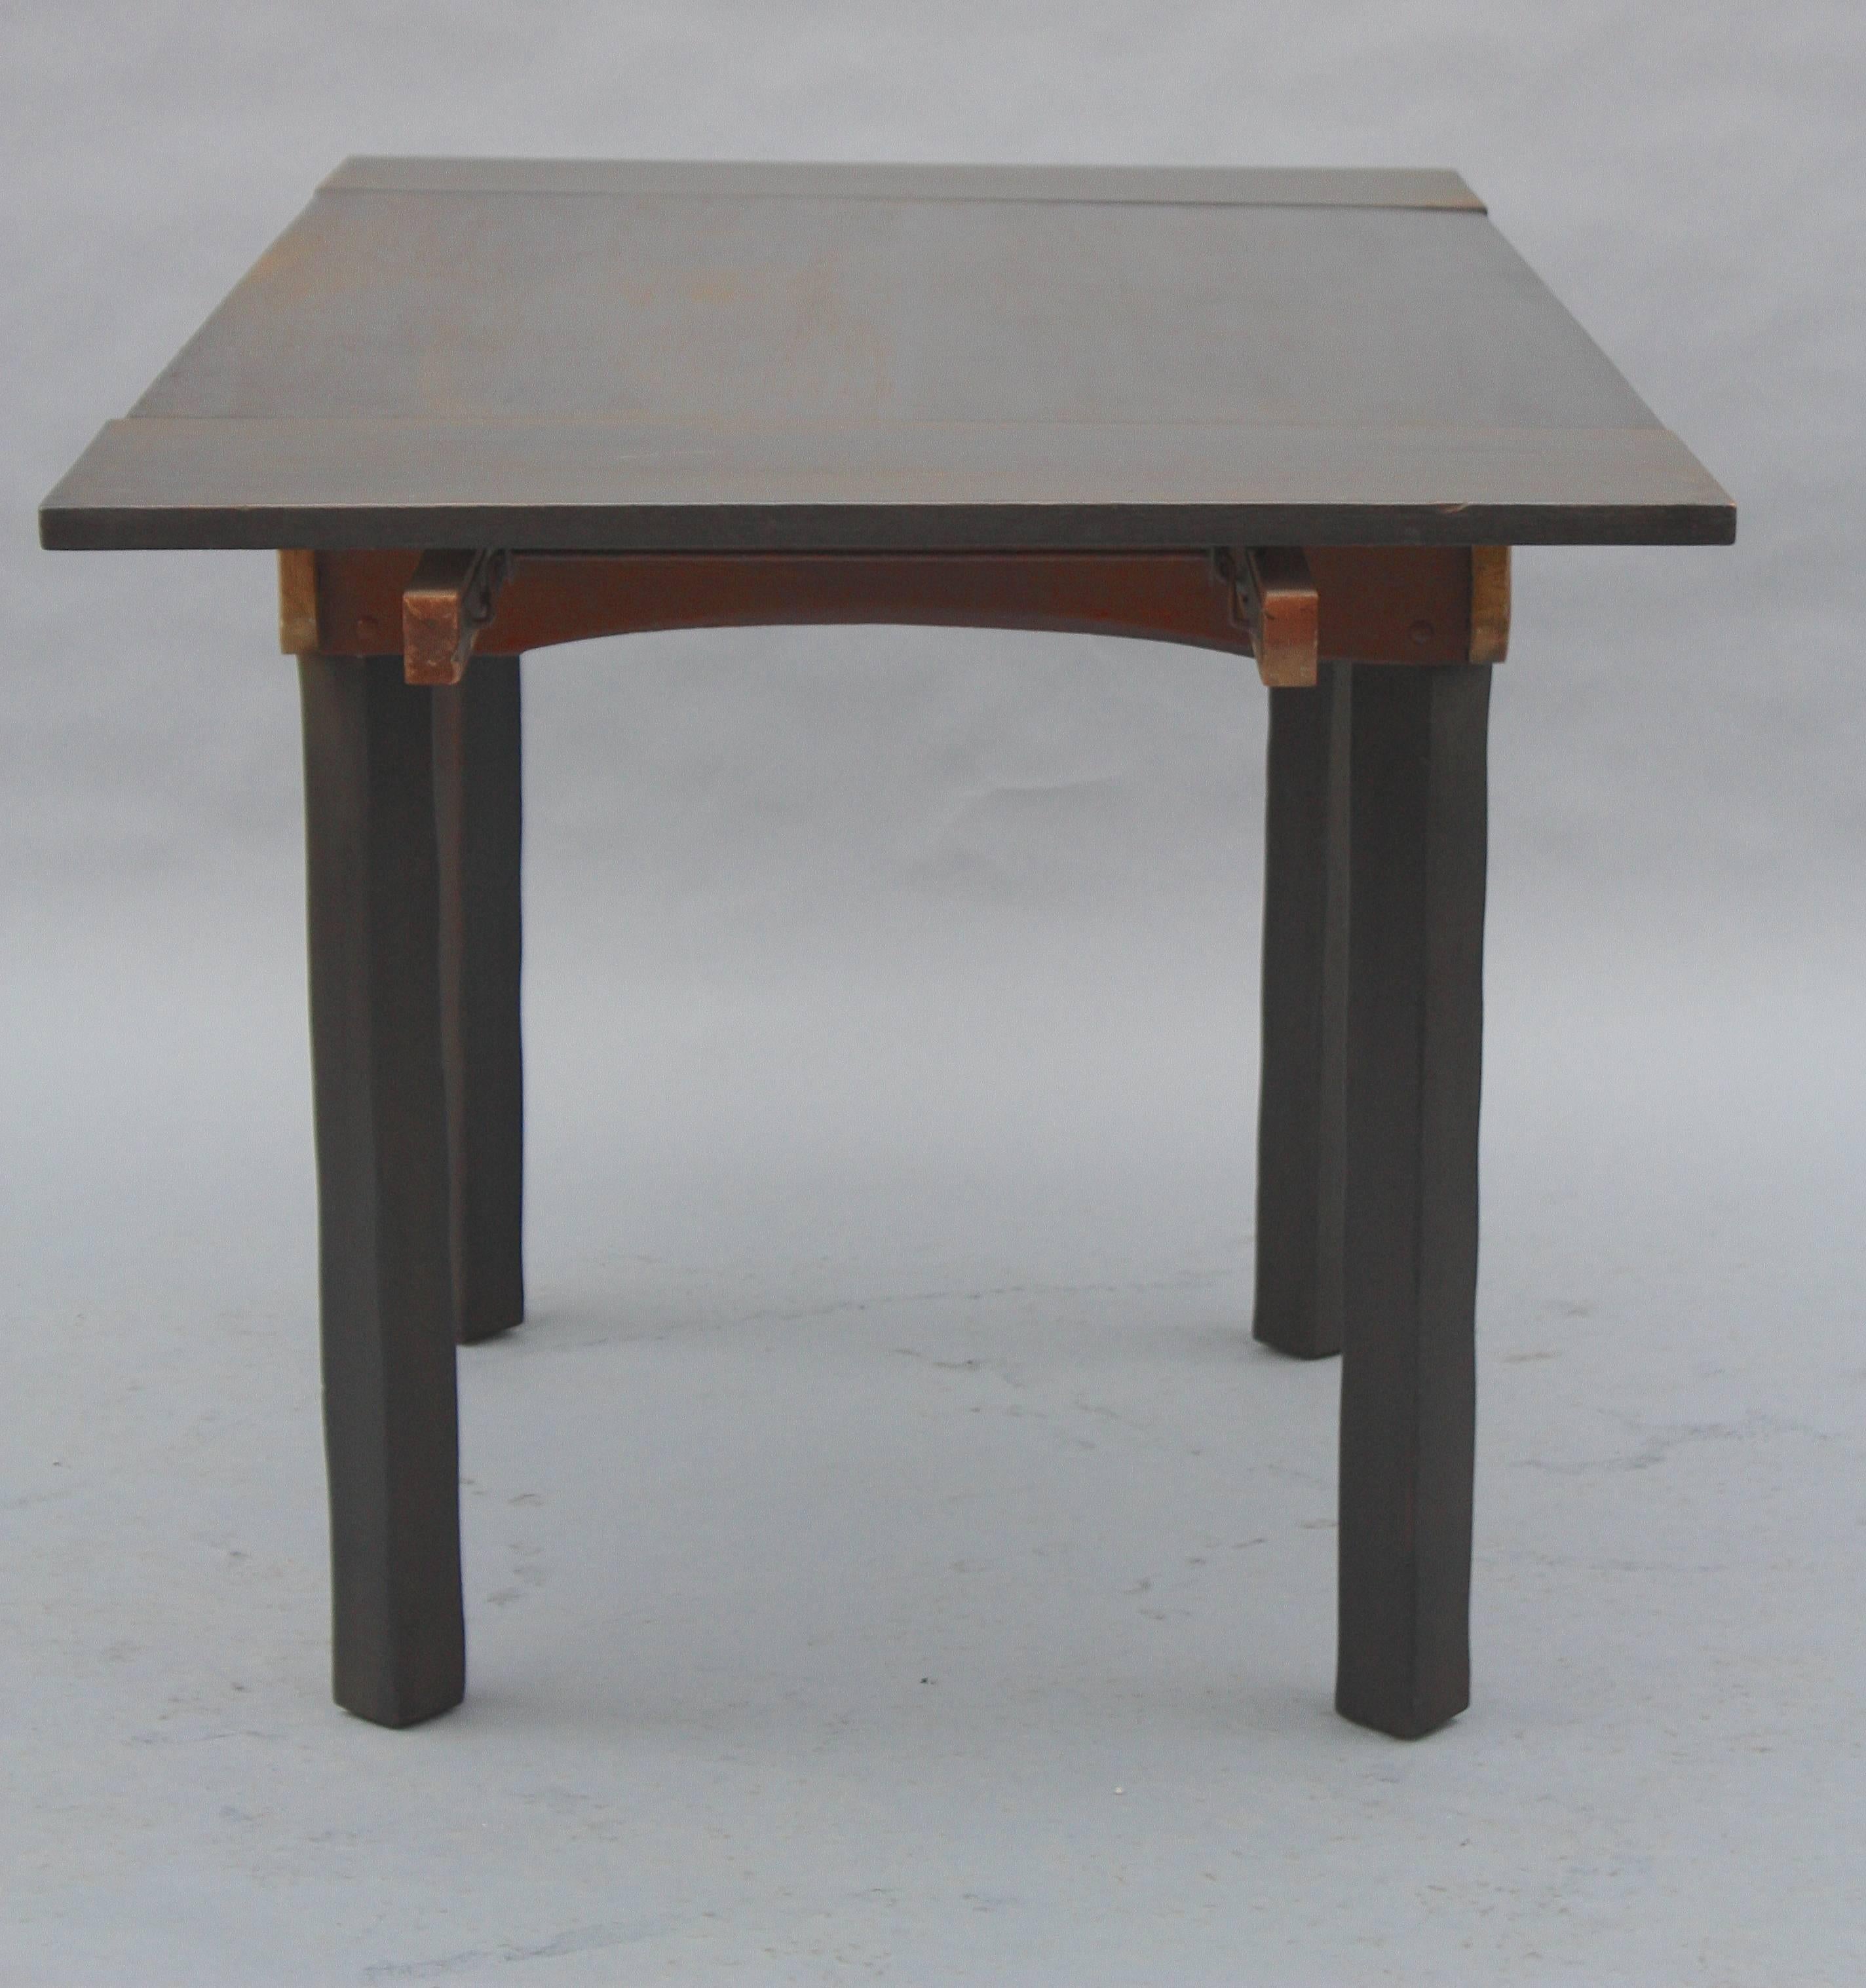 Rancho table with restored dark finish, circa 1930s. 

Measures: 30.25